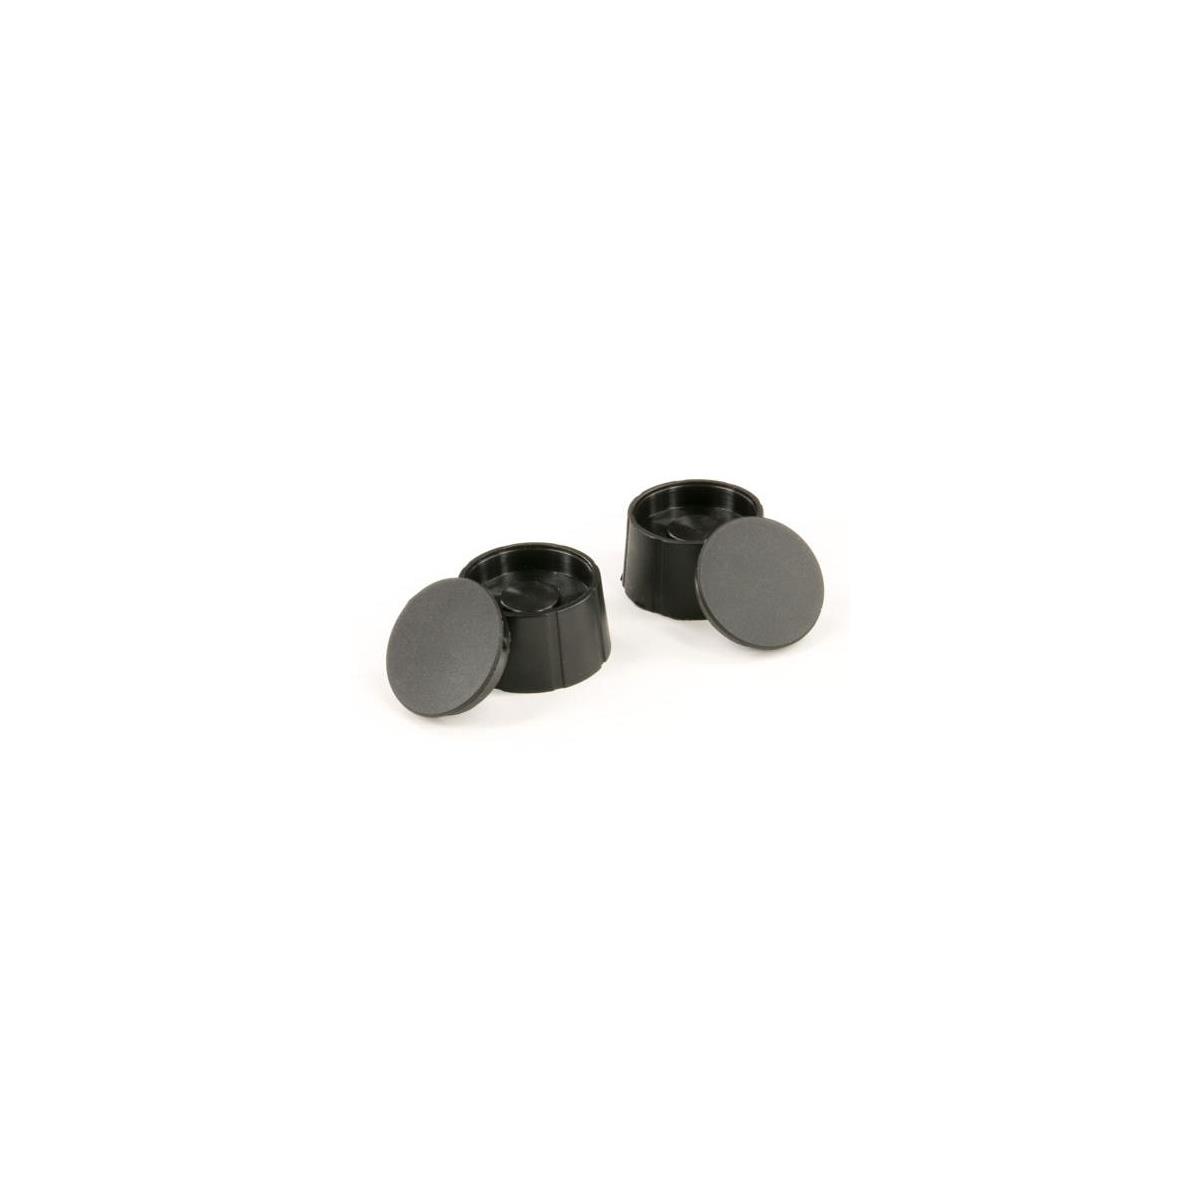 Image of Aviom 25mm Knob Kit for A360 Channel Volume and Central Control knob